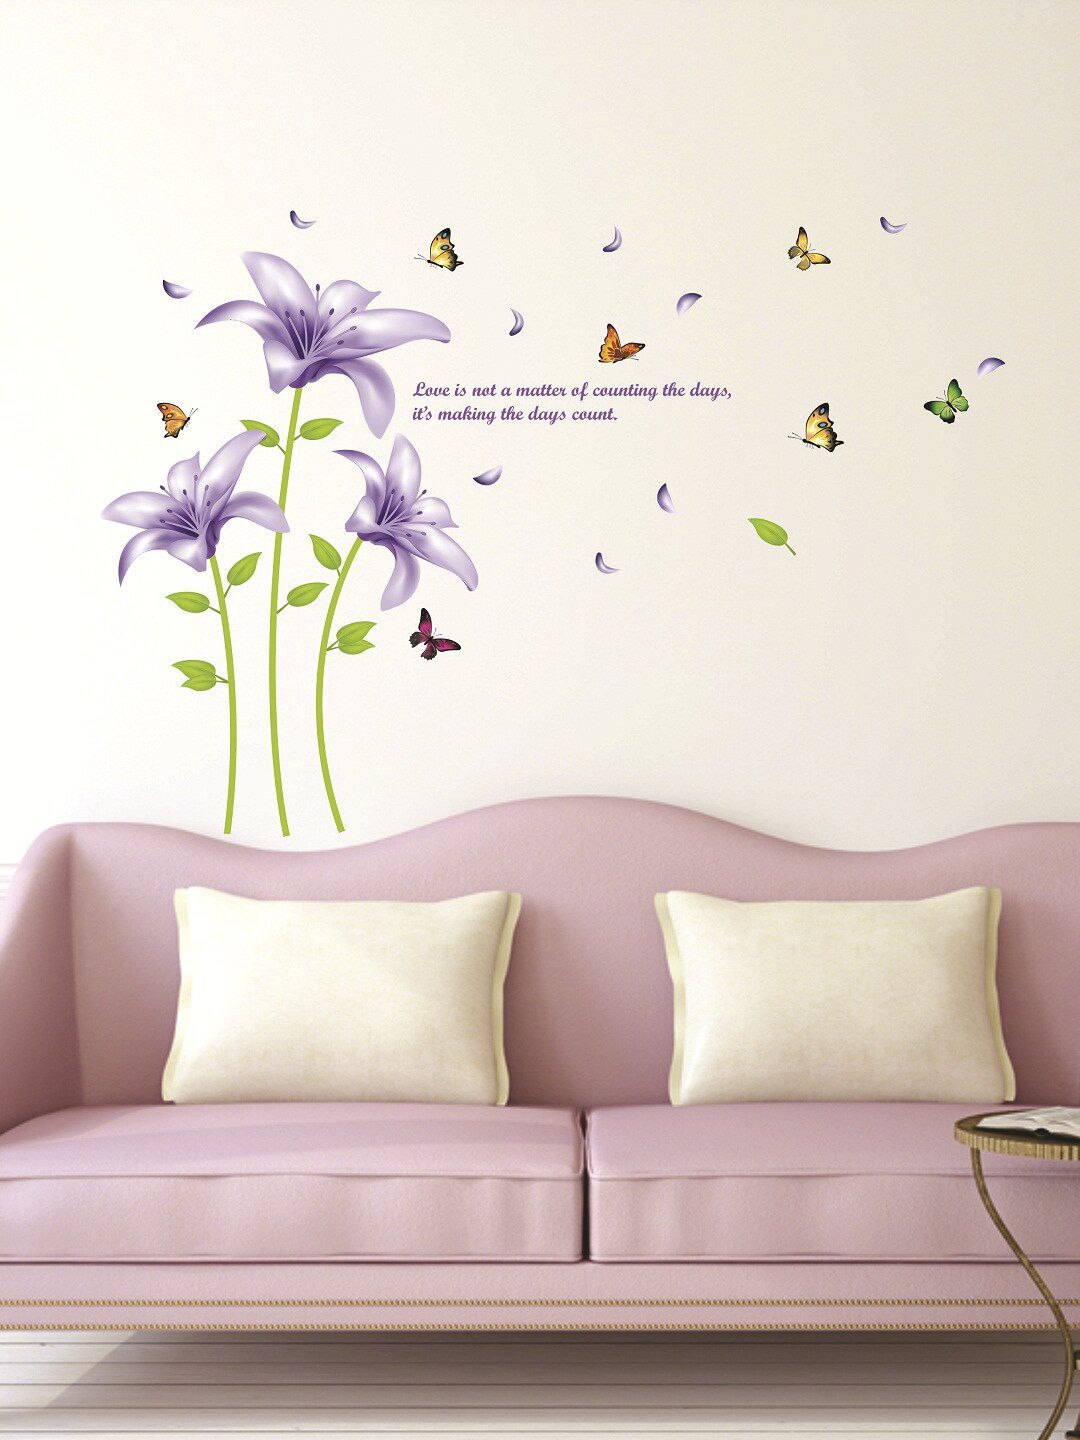 WALLSTICK Purple & Green Quotations Large Vinyl Wall Sticker Price in India